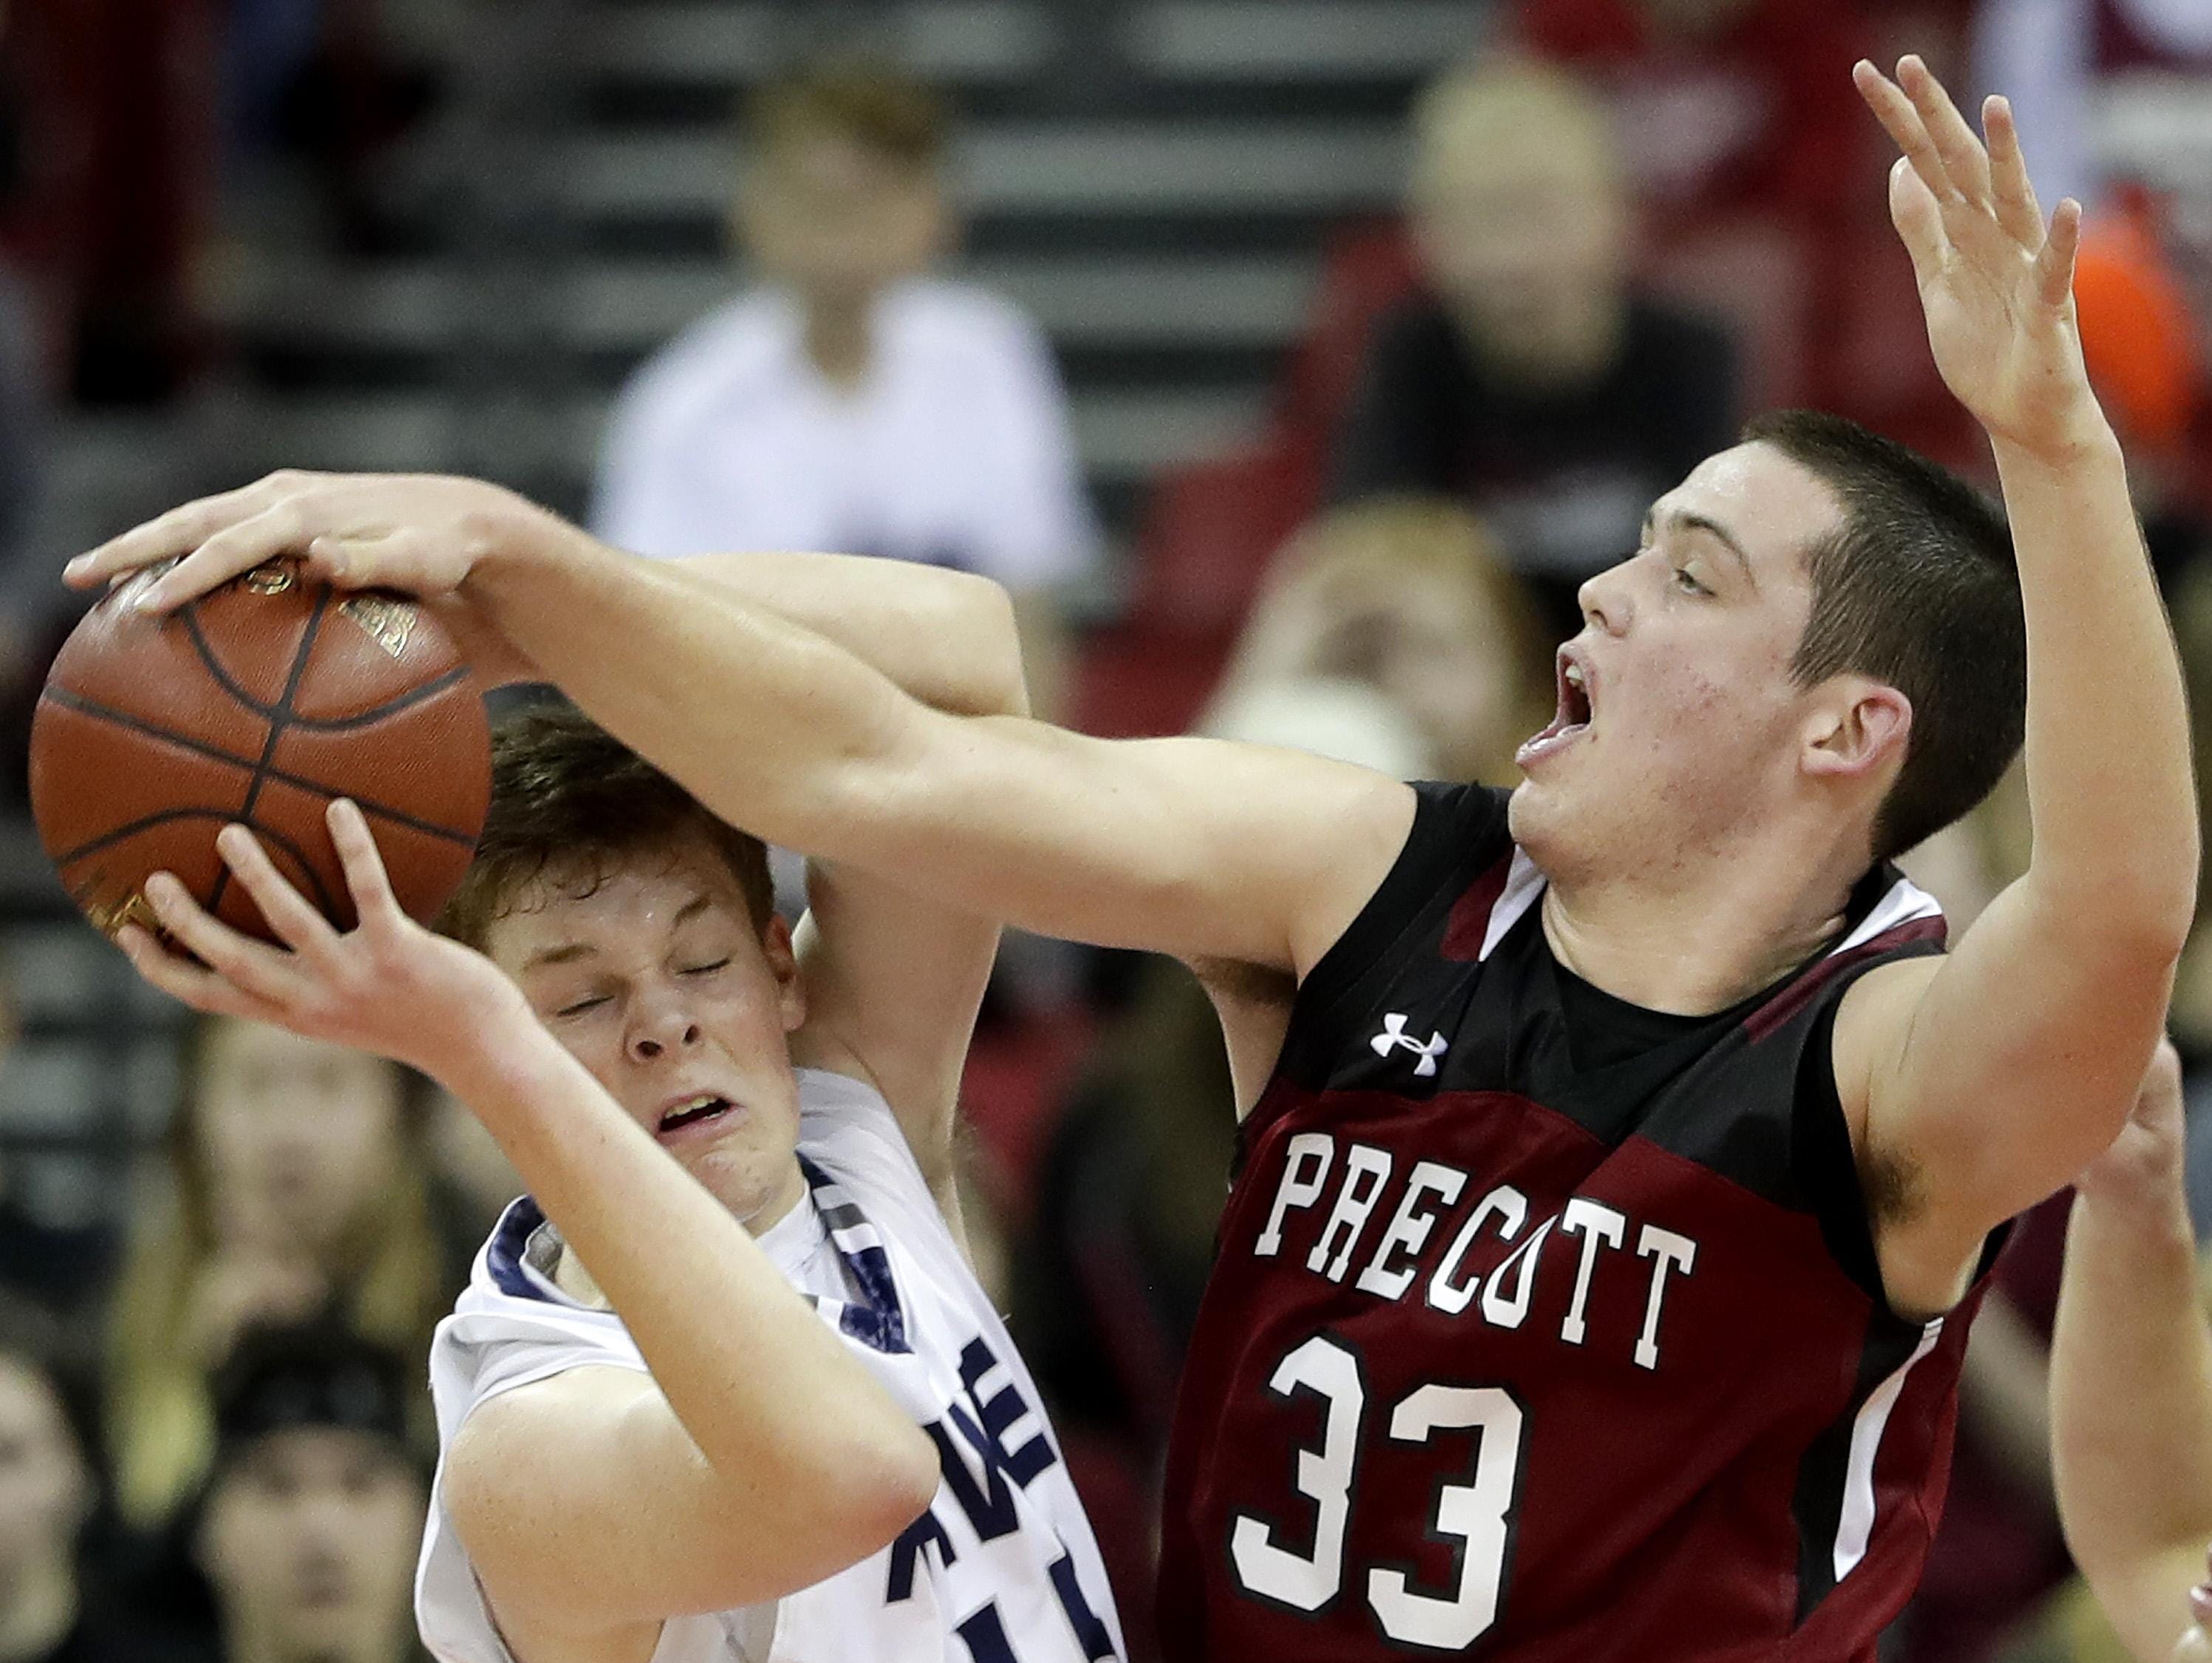 Xavier’s Nate DeYoung, left, has a shot blocked by Owen Hamilton during Saturday’s game in Madison.